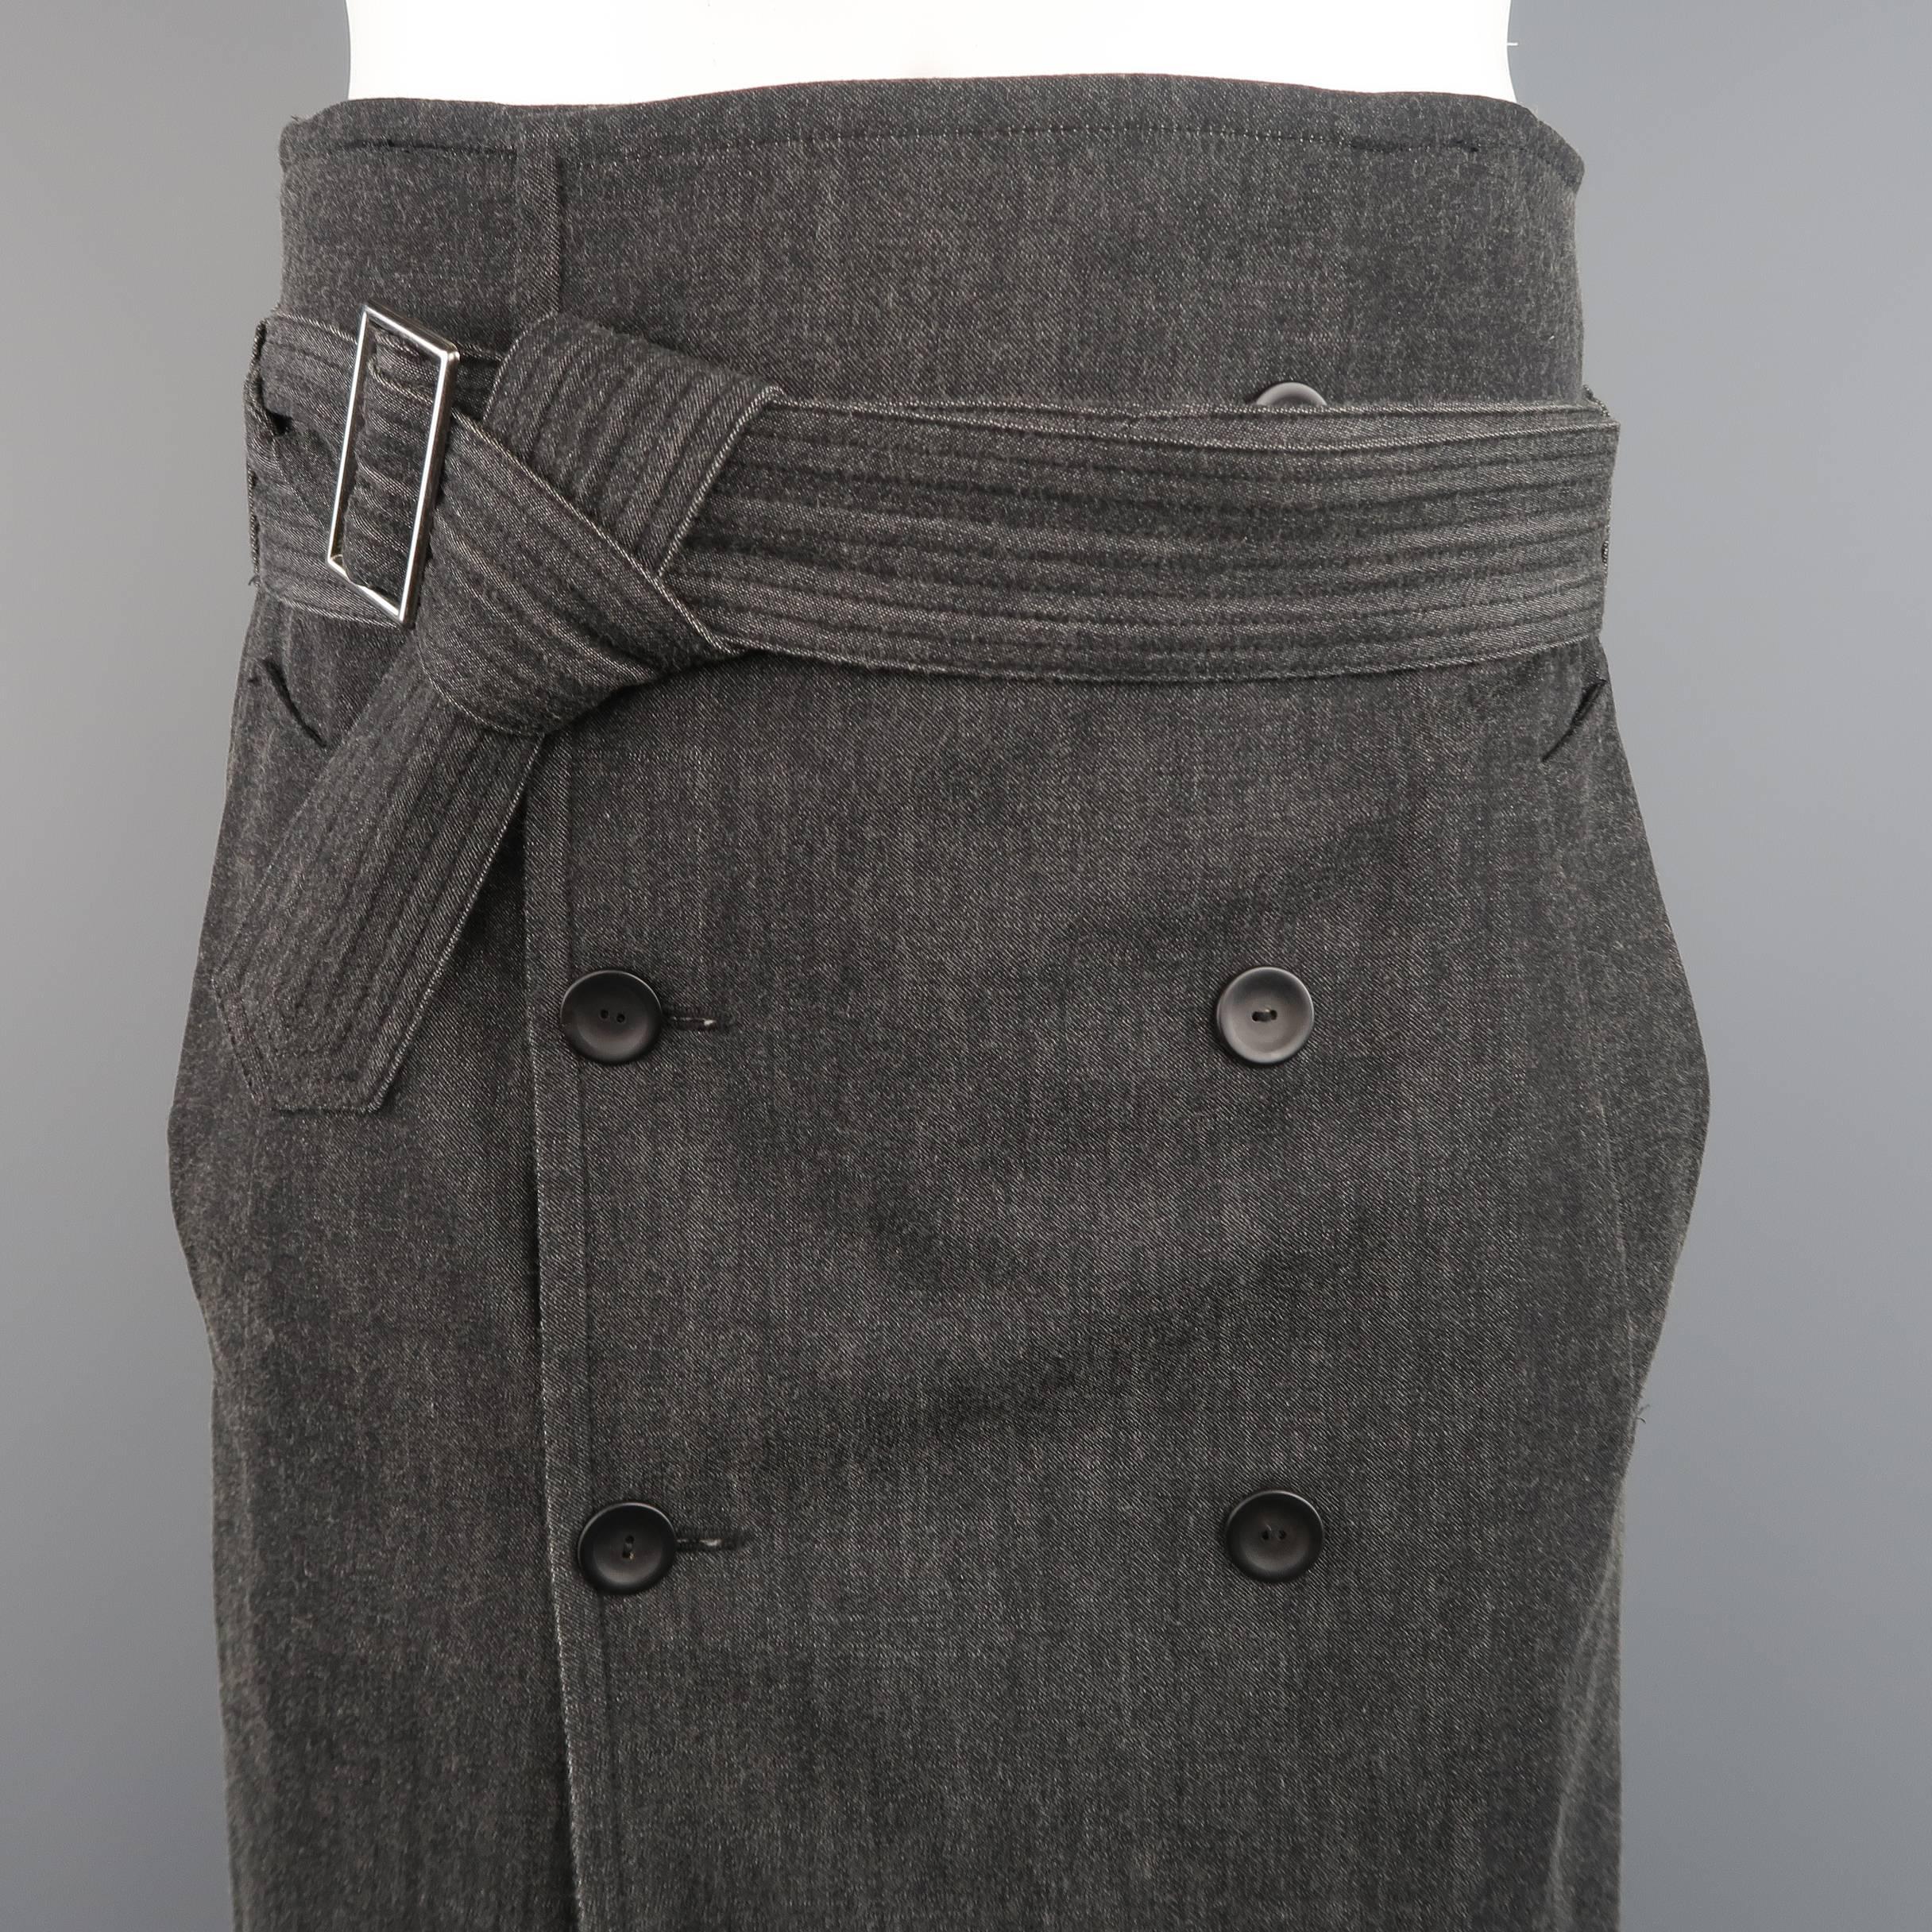 Vintage GAULTIER2 by JEAN PAUL GAULTIER kilt comes in charcoal gray rayon denim and features a double breasted trench coat inspired closure, slanted pockets, and belted waist with bondage straps. Made in Italy.
 
Excellent Pre-Owned